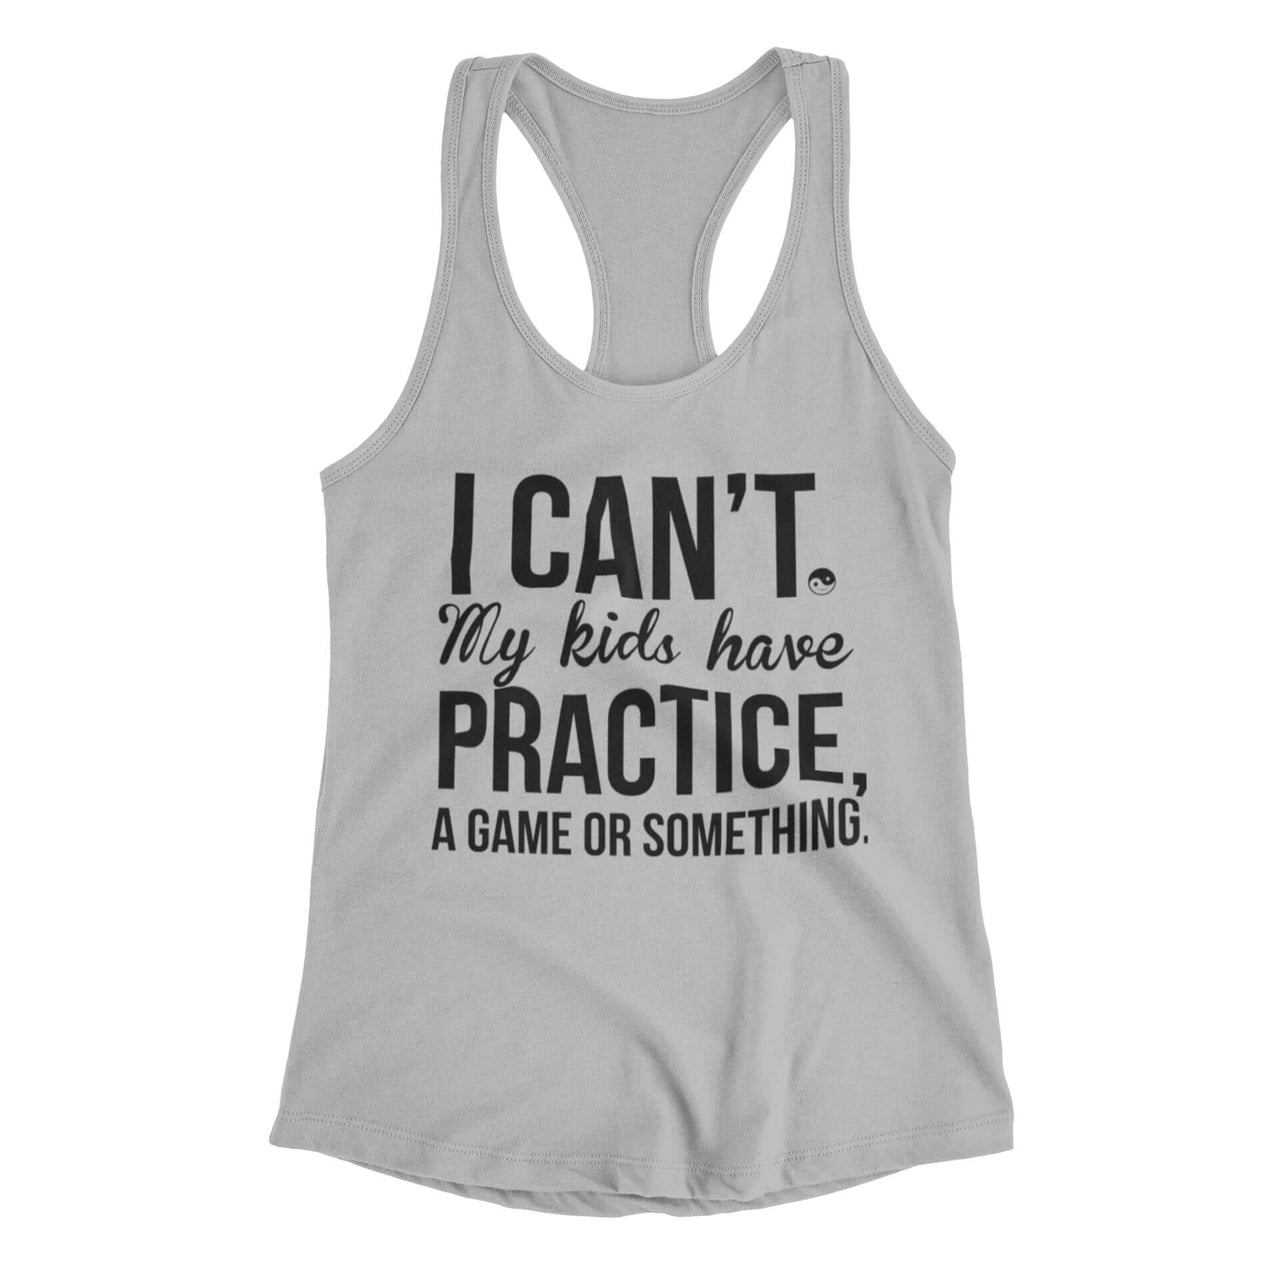 Amusing gray racerback tank top for wives featuring the text 'I Can't, My Kids Have a Game or Something'. Designed by WooHoo Apparel.